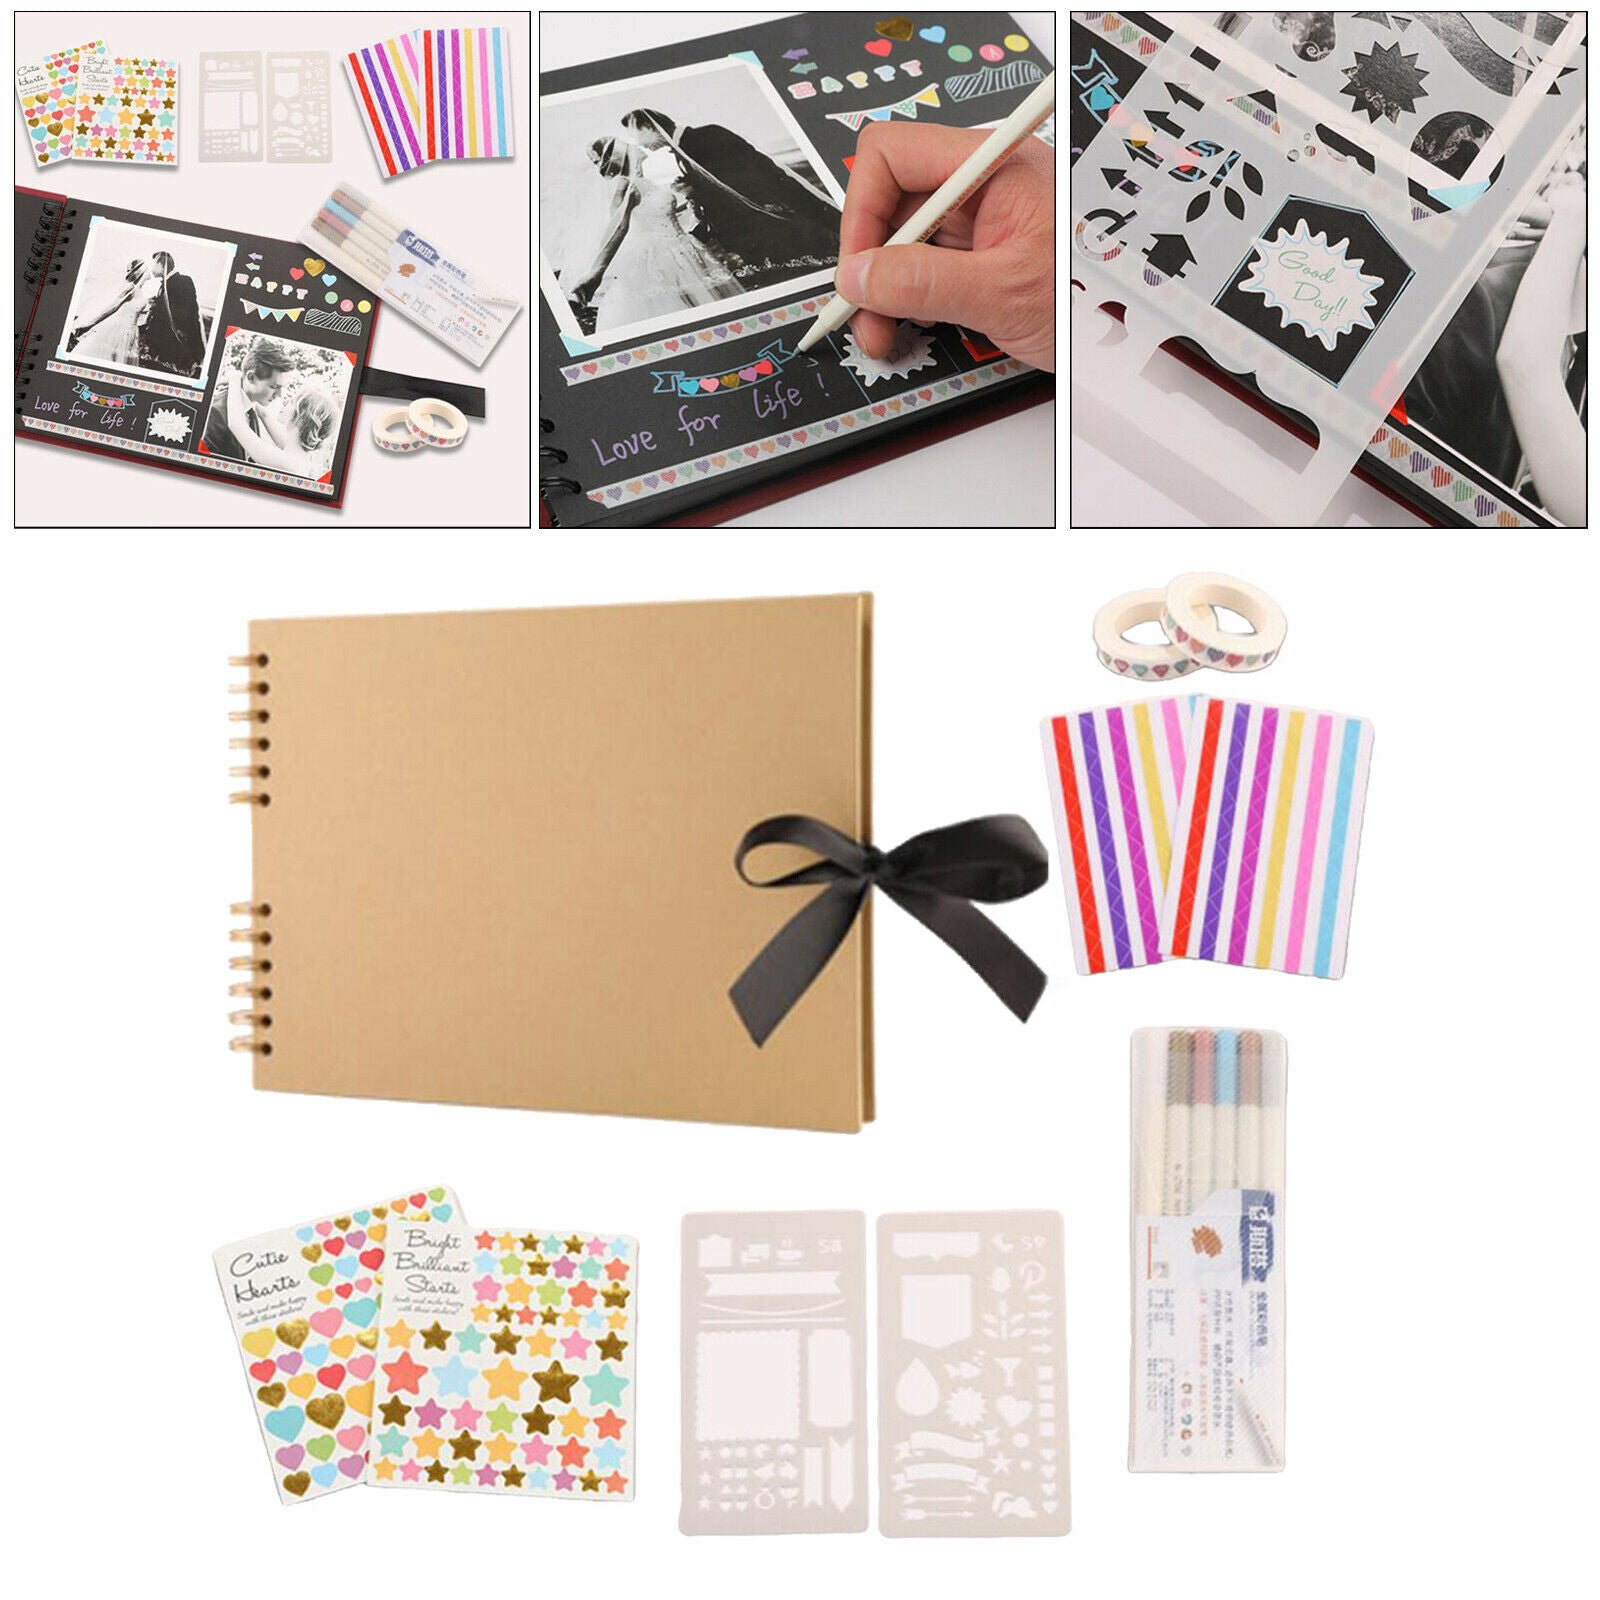 40 Black Pages Photo Album DIY Kit Guest Book Anniversary Gifts Champagne